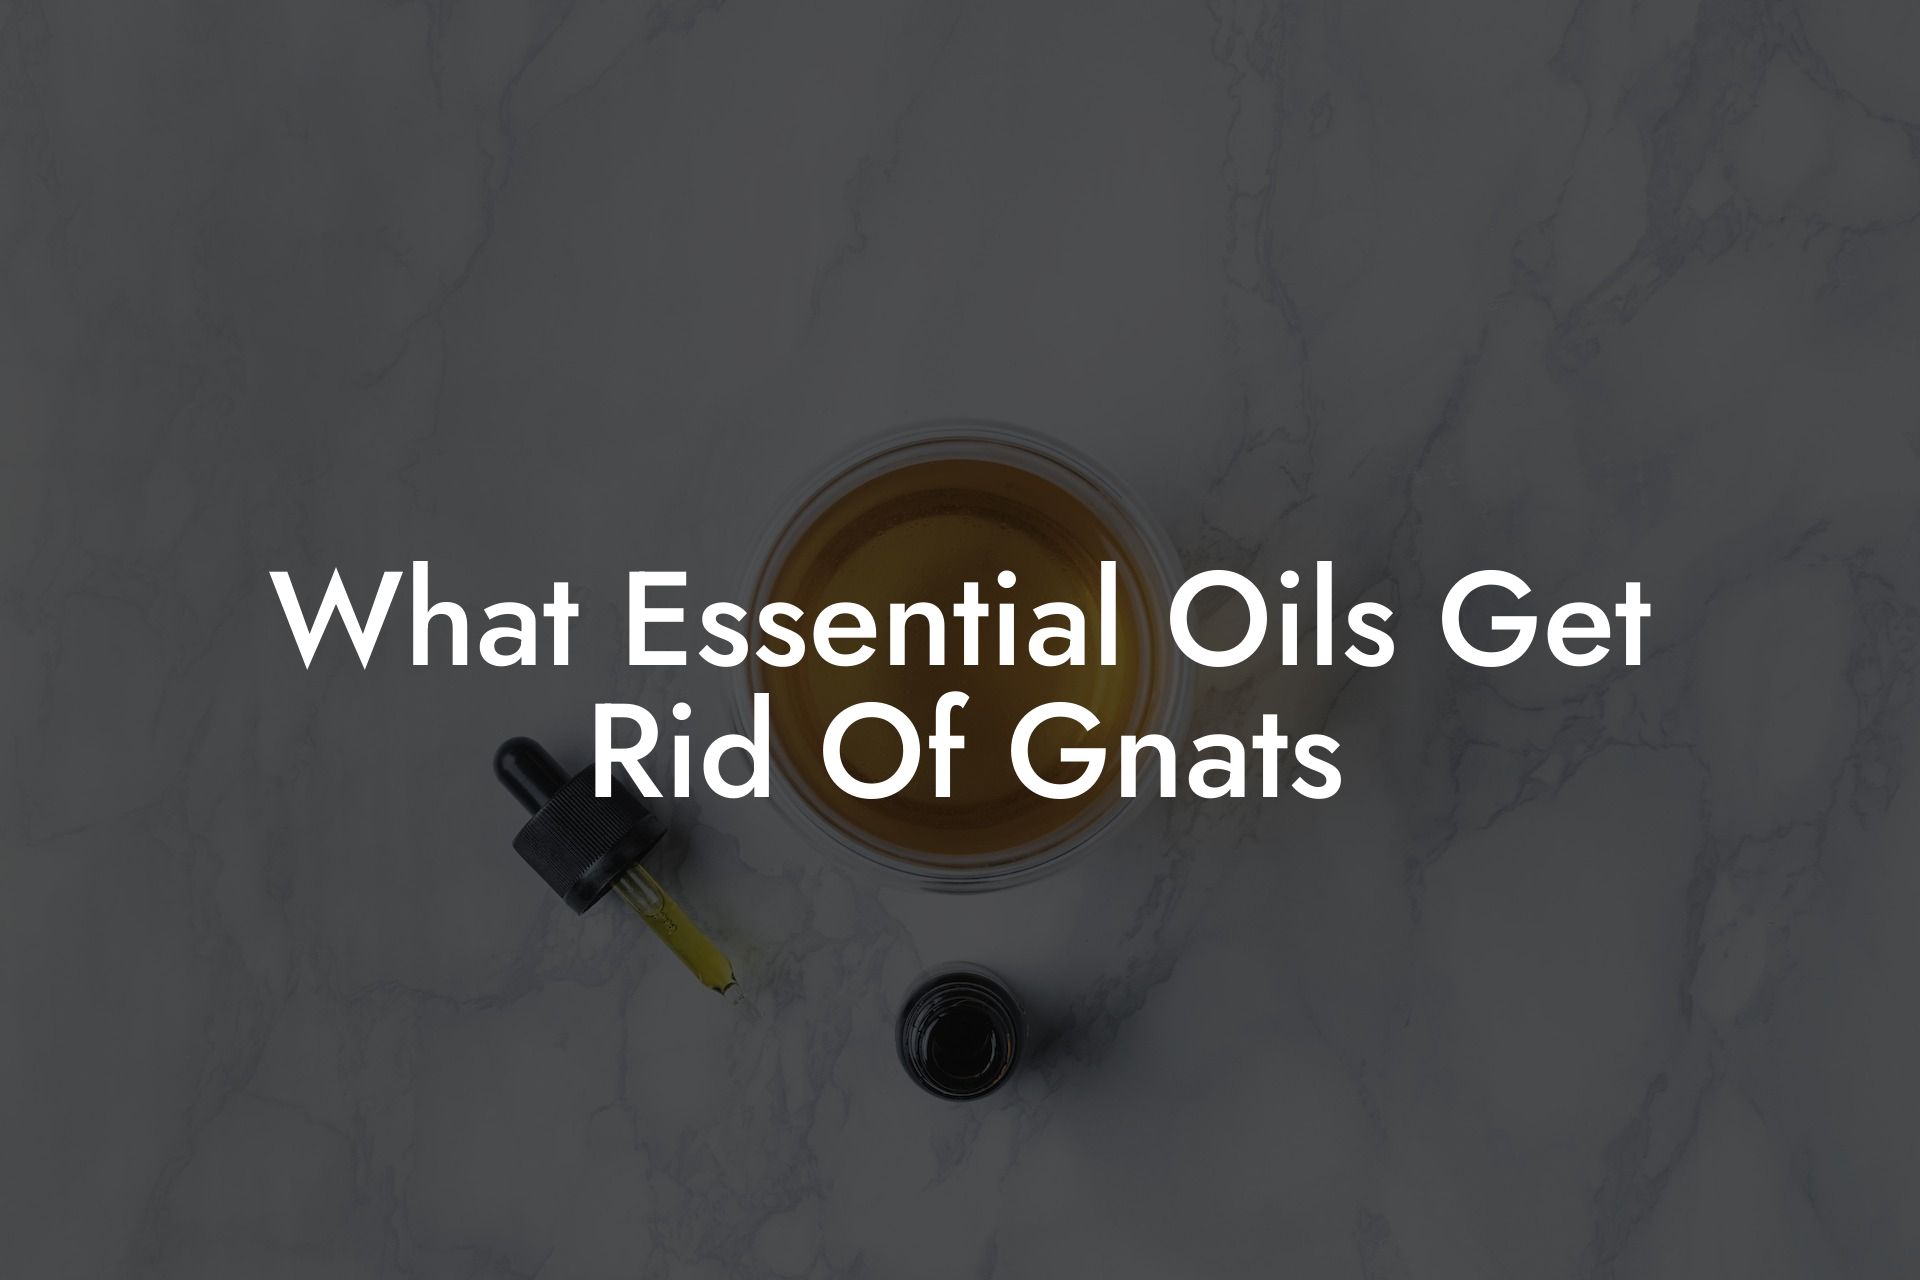 What Essential Oils Get Rid Of Gnats